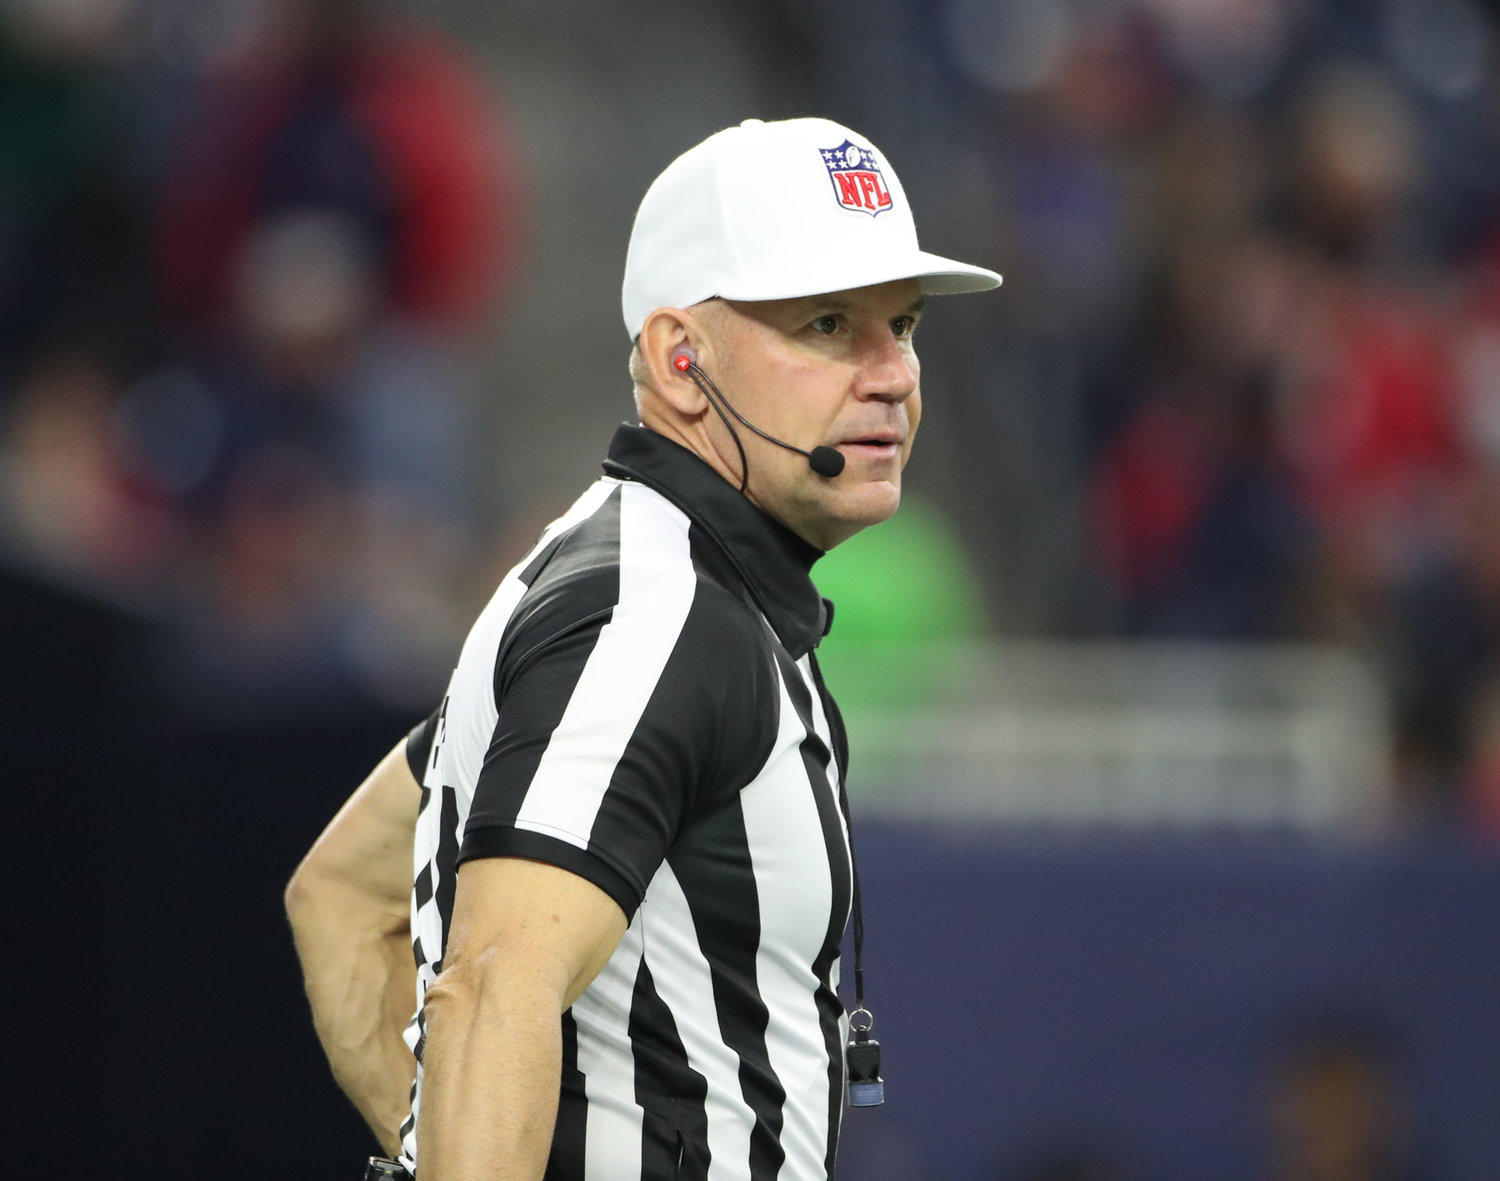 Referee Clete Blakeman (34) during an NFL game between the Houston Texans and the New York Jets on November 28, 2021 in Houston, Texas. The Jets won, 21-14